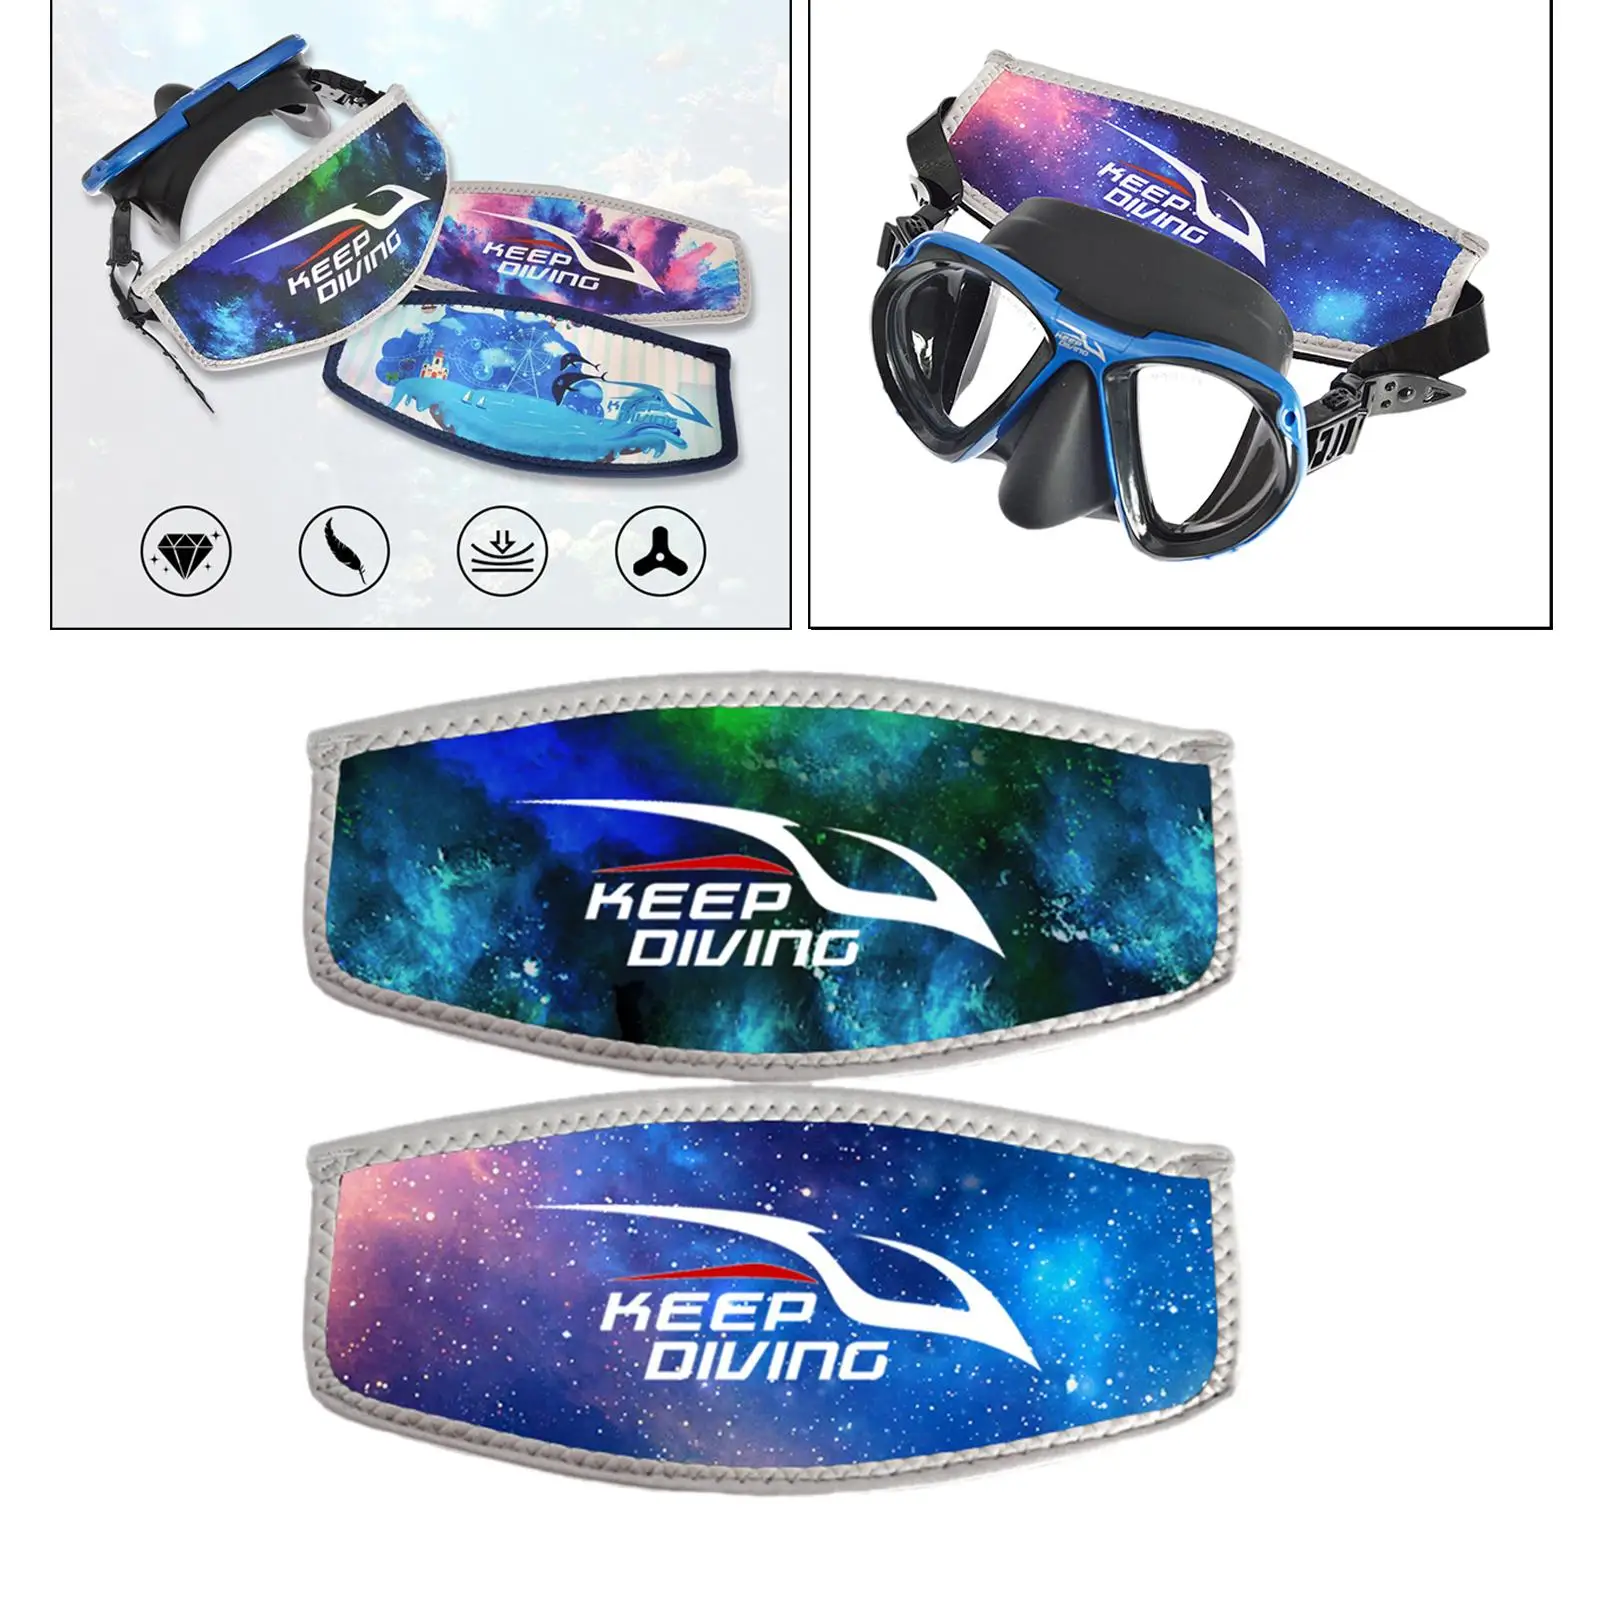 Innovative Scuba Concepts Scuba Diving Mask  Water Sports Snorkeling Mask Strap Cover Protectstion Hair Strap Accessories